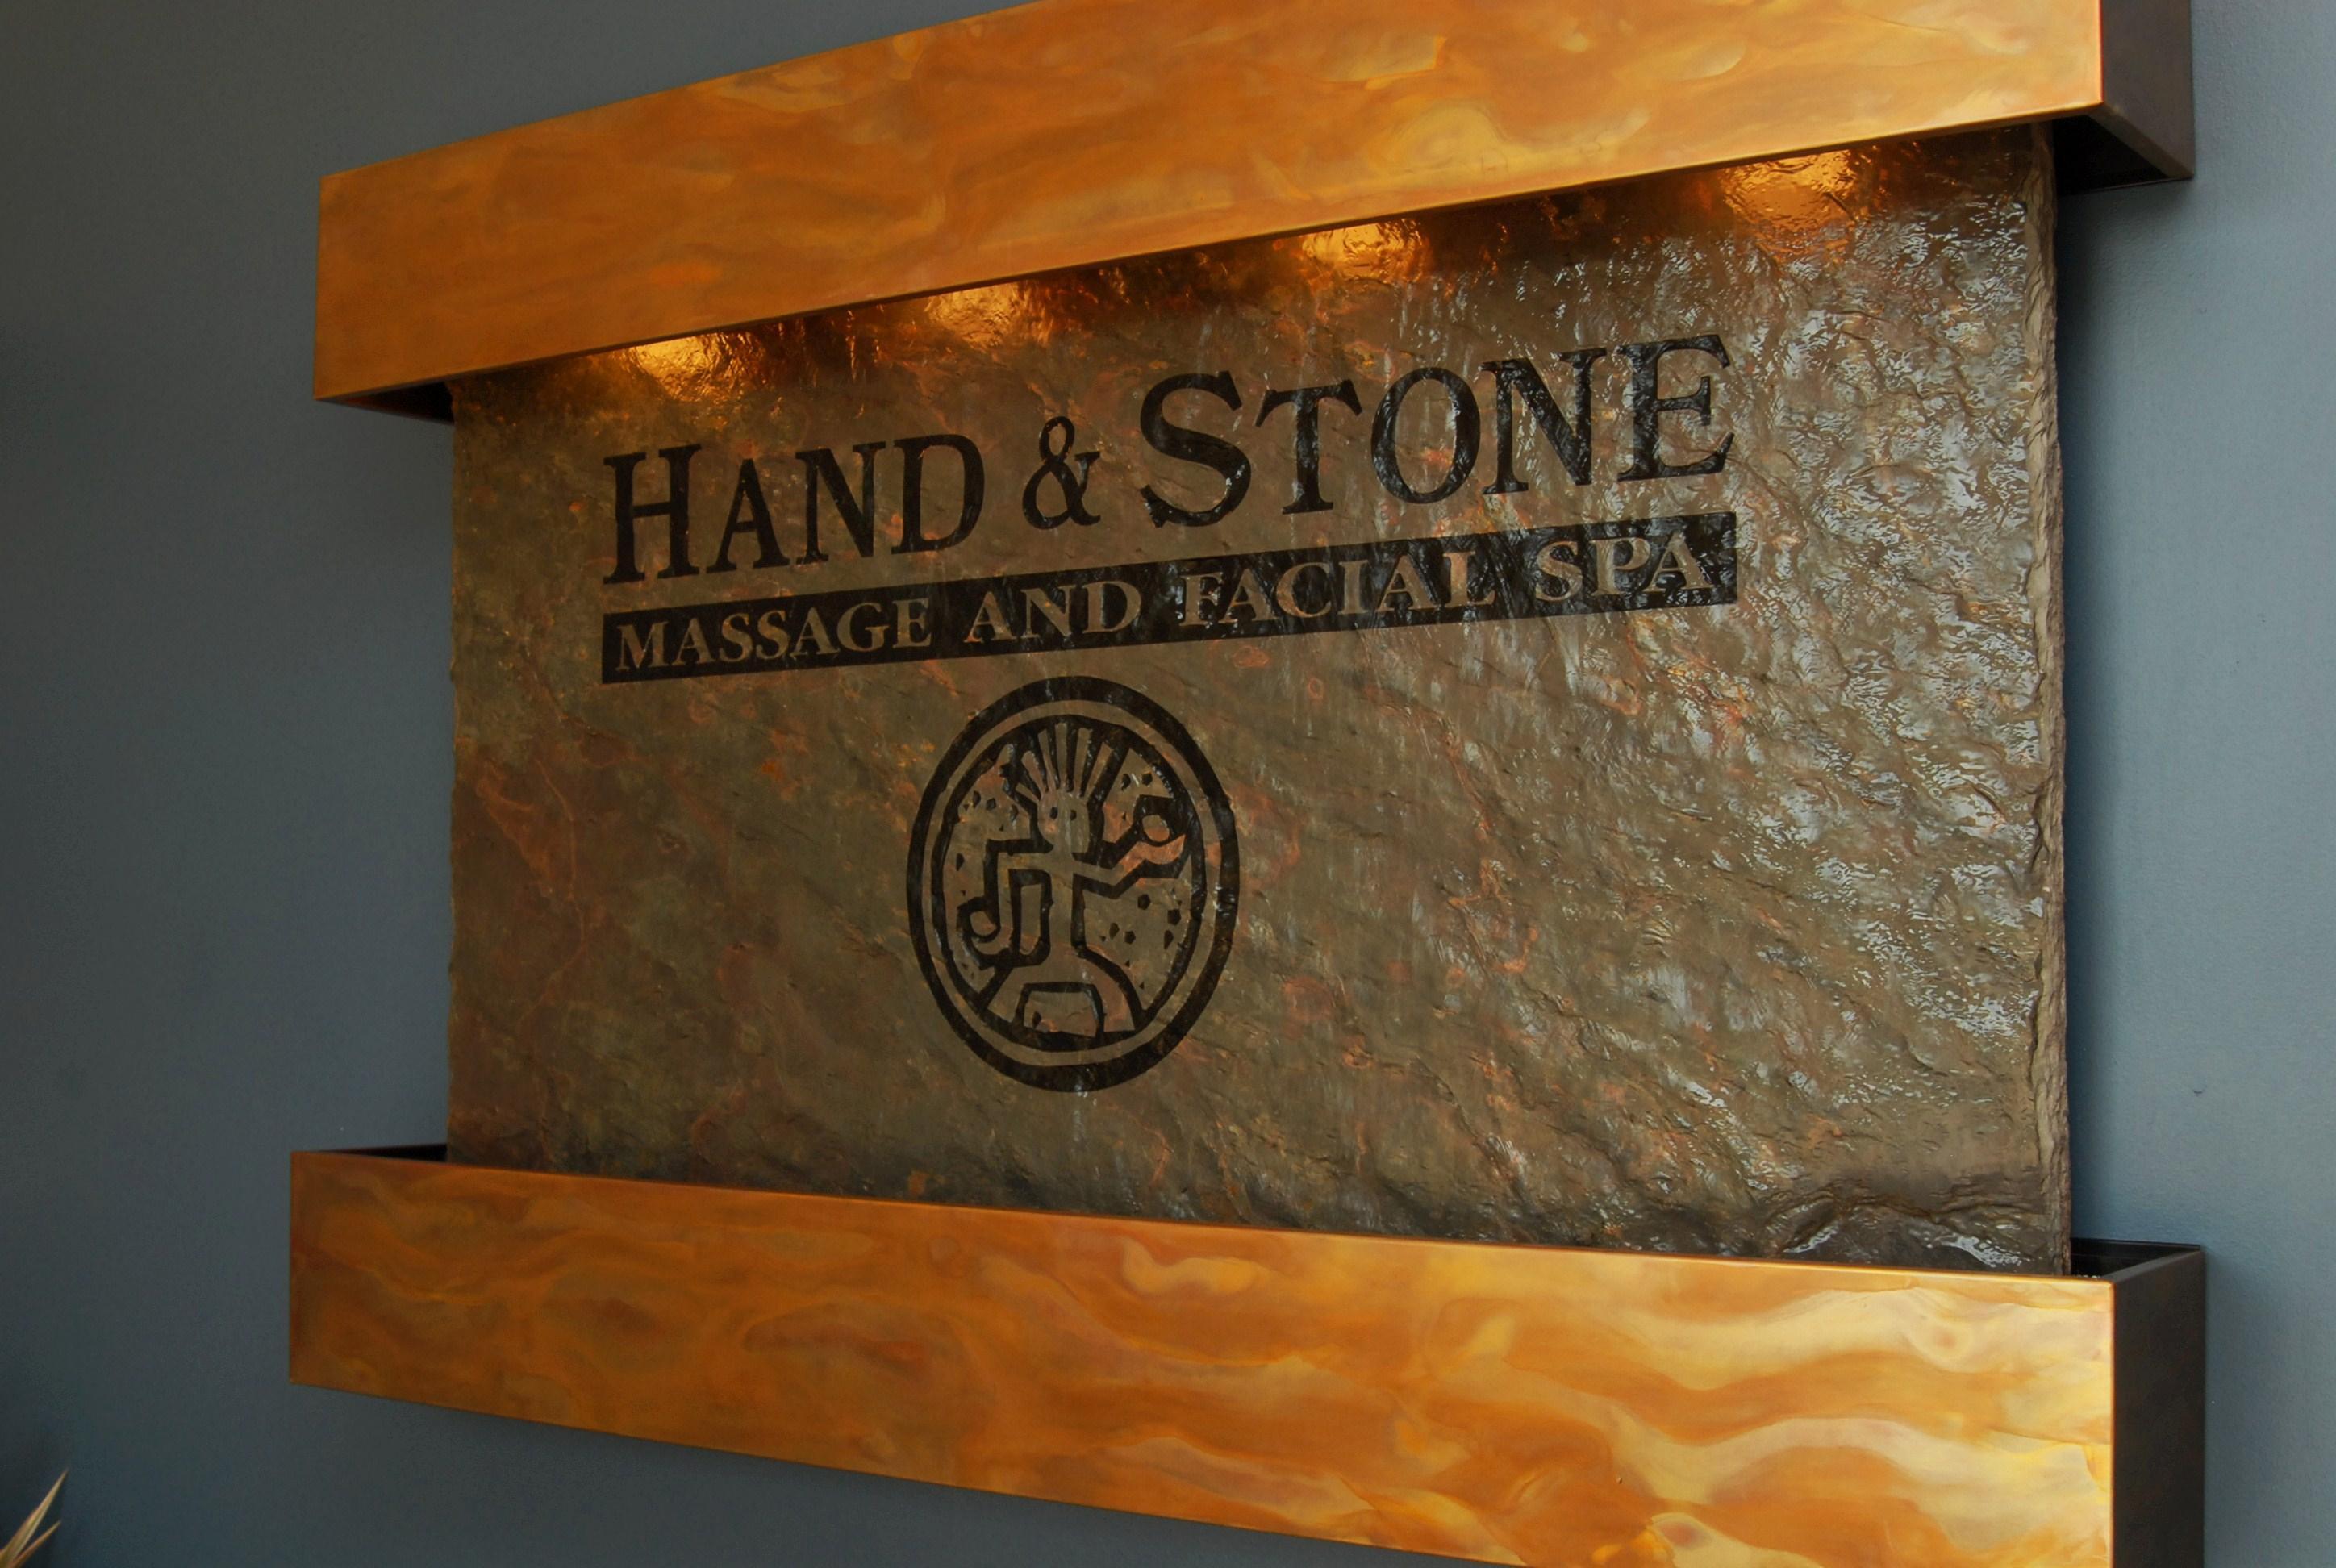 Hand & Stone Massage and Facial Spa, Annapolis Maryland (MD